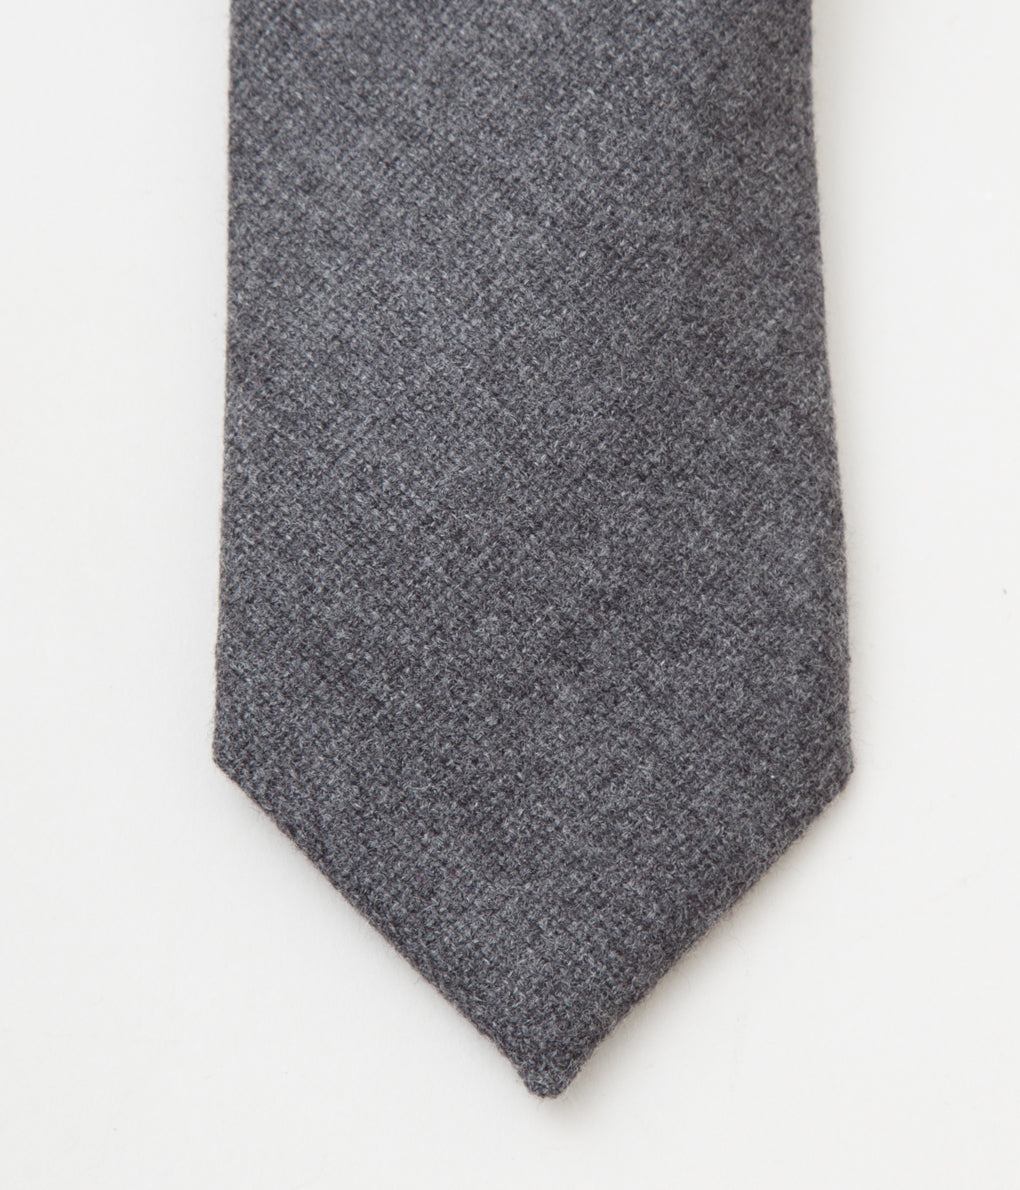 FINE AND DANDY "TIES" (CHARCOAL WOOL)